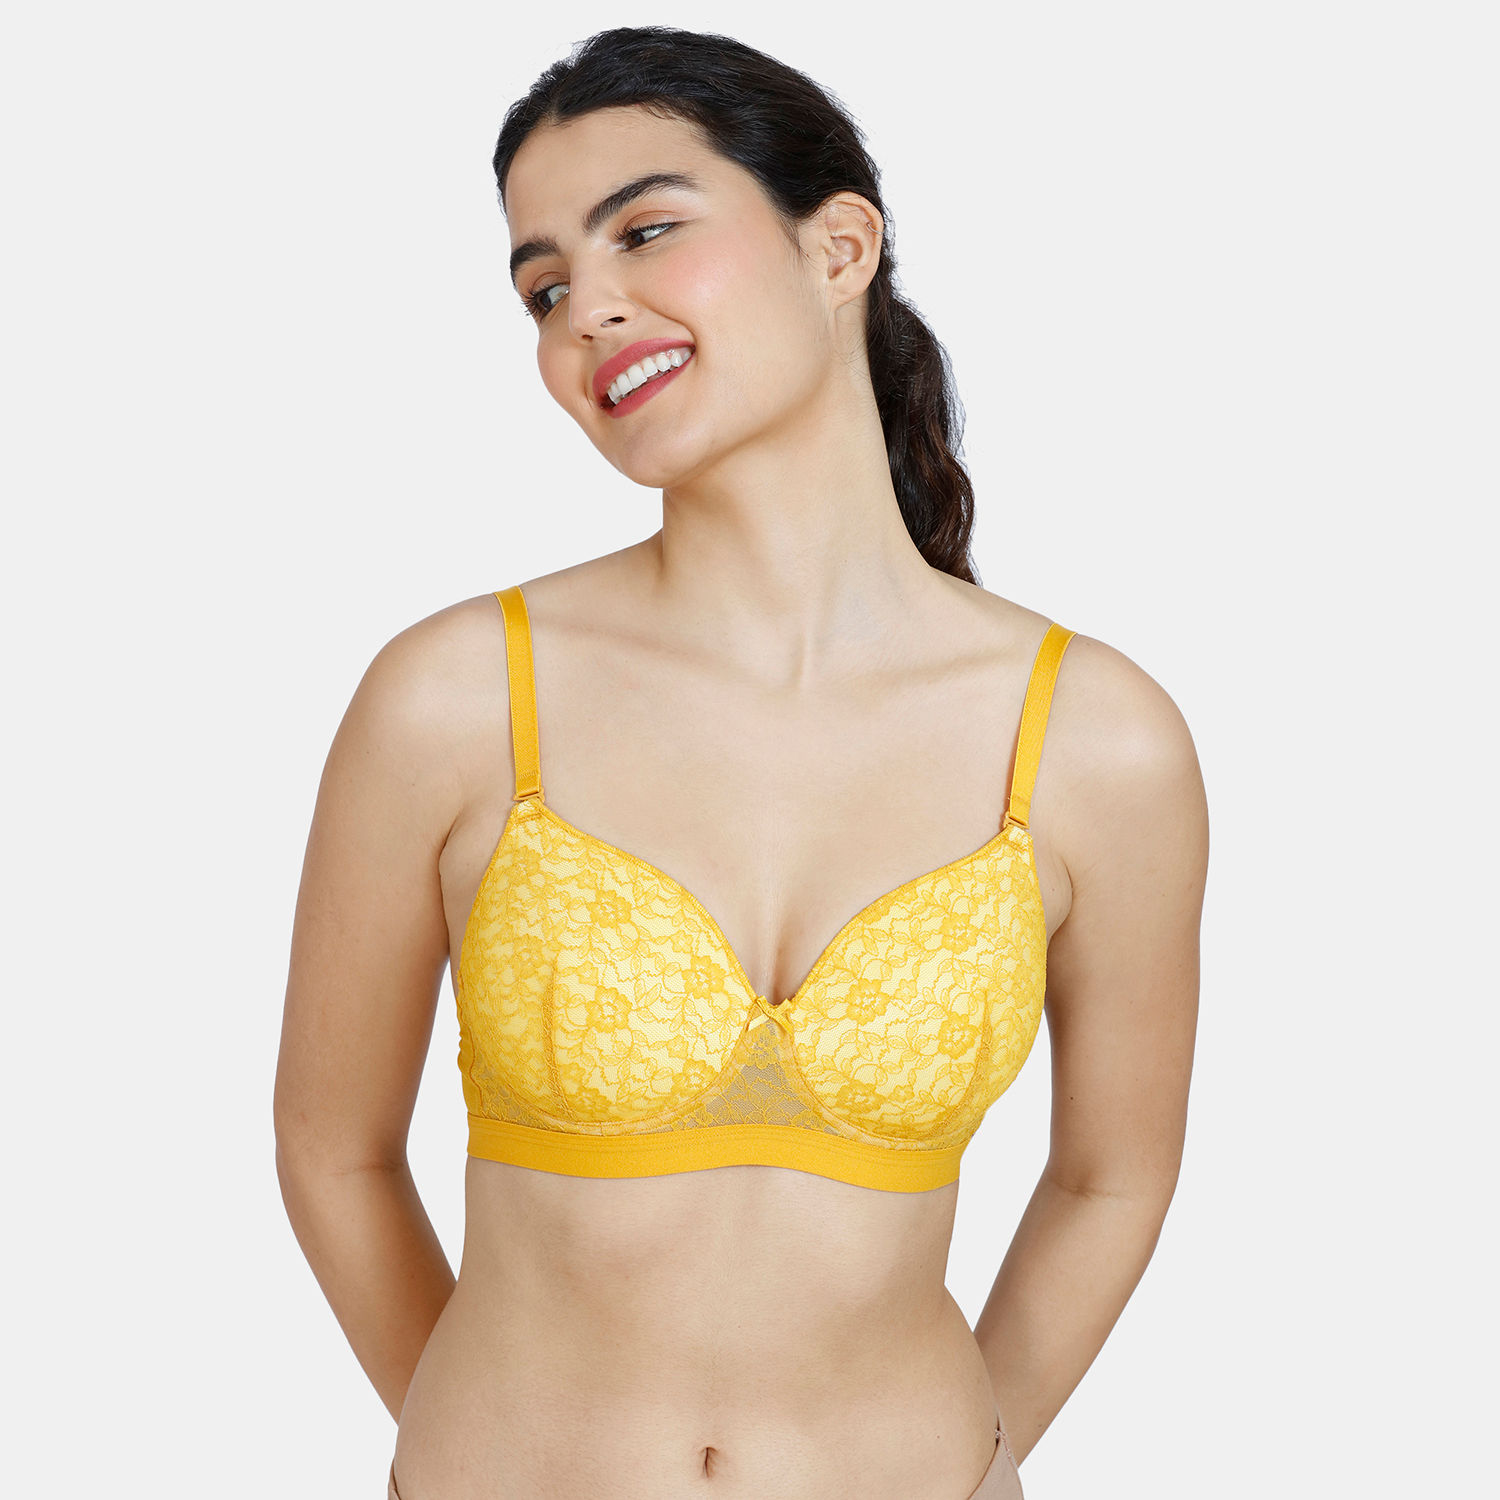 Zivame Vintage Lace Padded Wired Bra With Bikini Panty - Golden Yellow